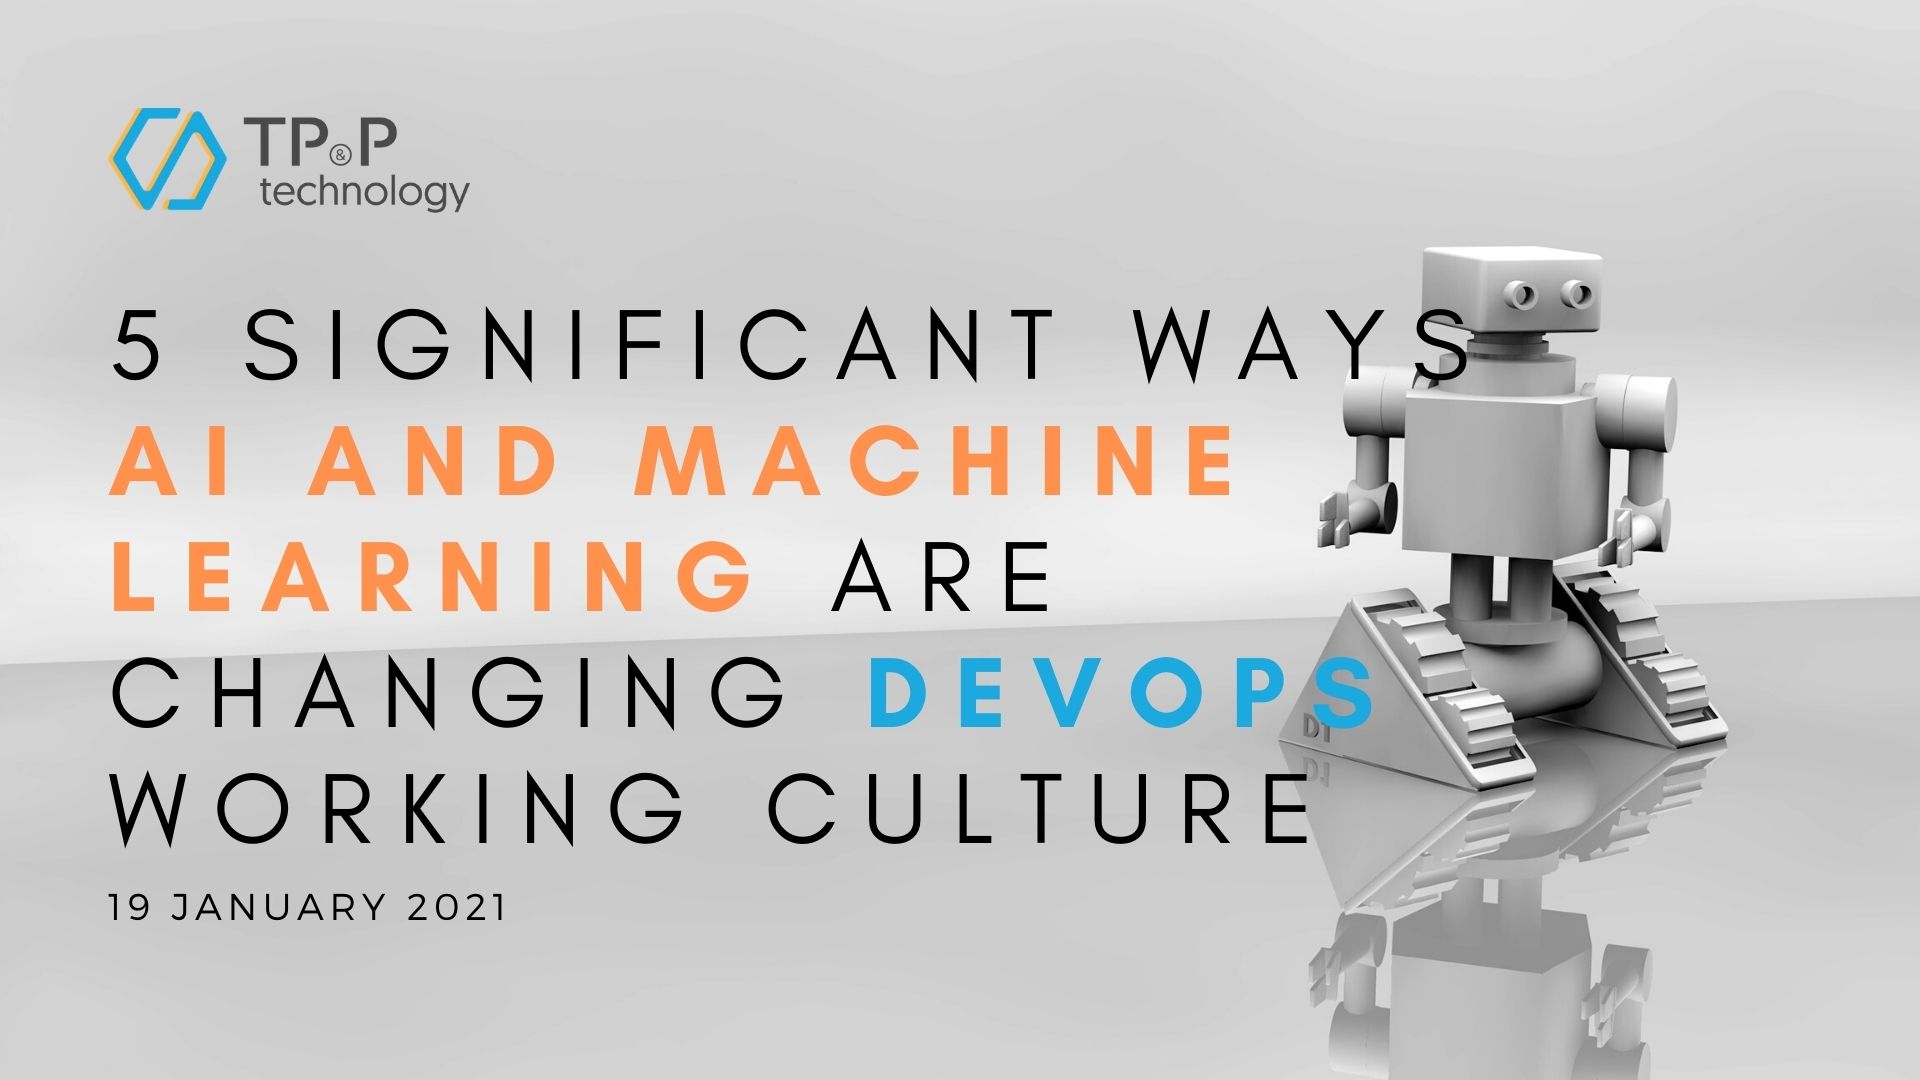 5 Significant Ways AI and ML Are Changing DevOps Working Culture